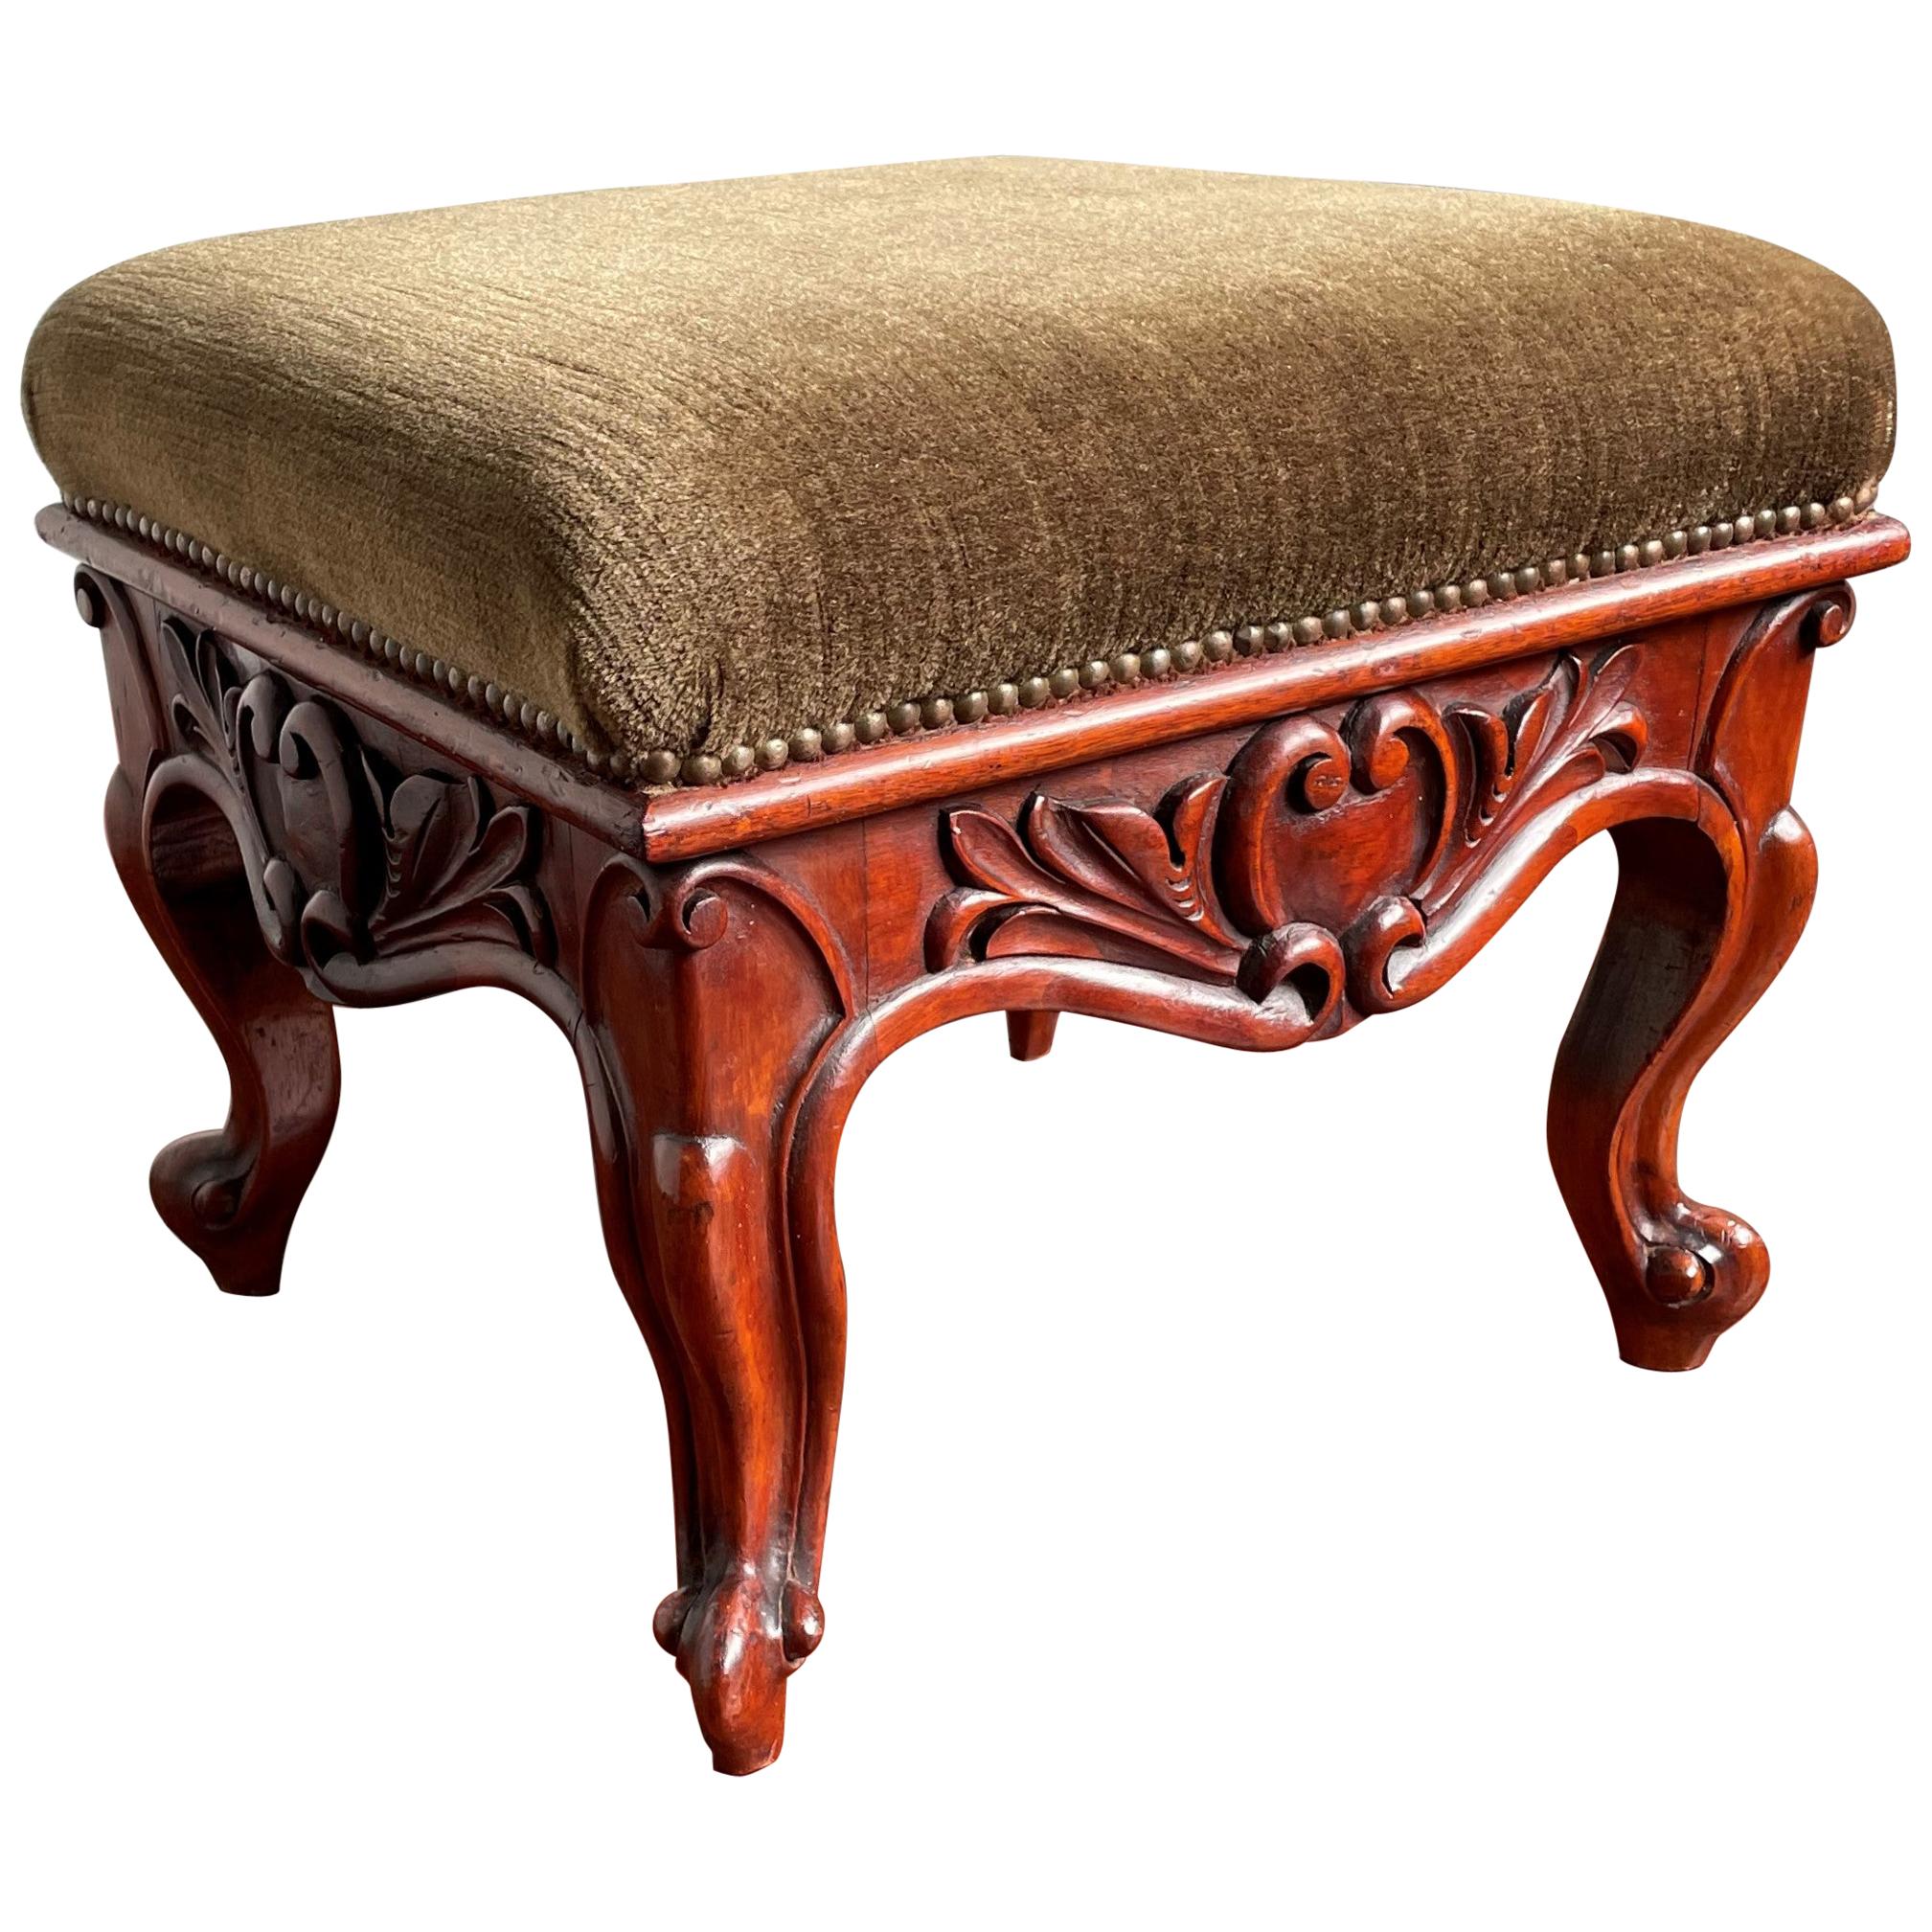 Antique Hand Carved Solid Walnut Footstool / Stool with Perfect Upholstery